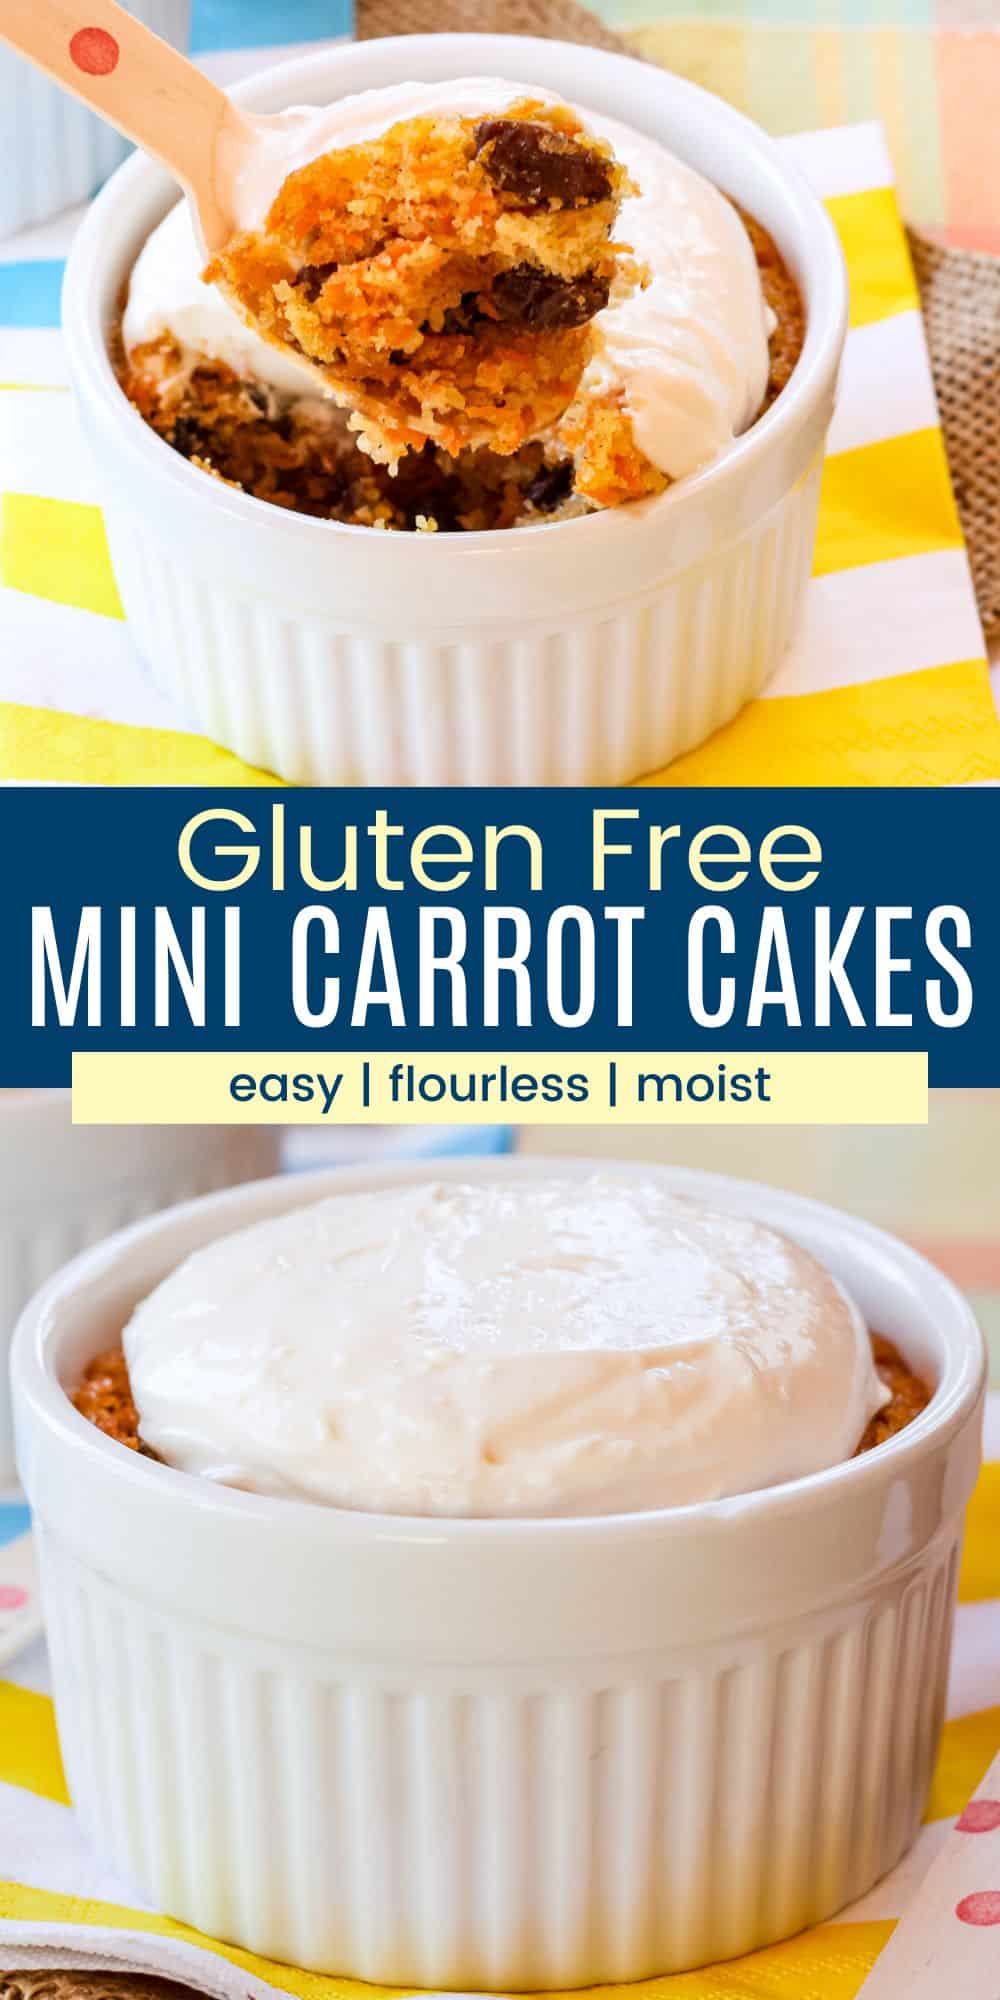 Gluten-Free Mini Carrot Cakes for Two | Cupcakes & Kale Chips